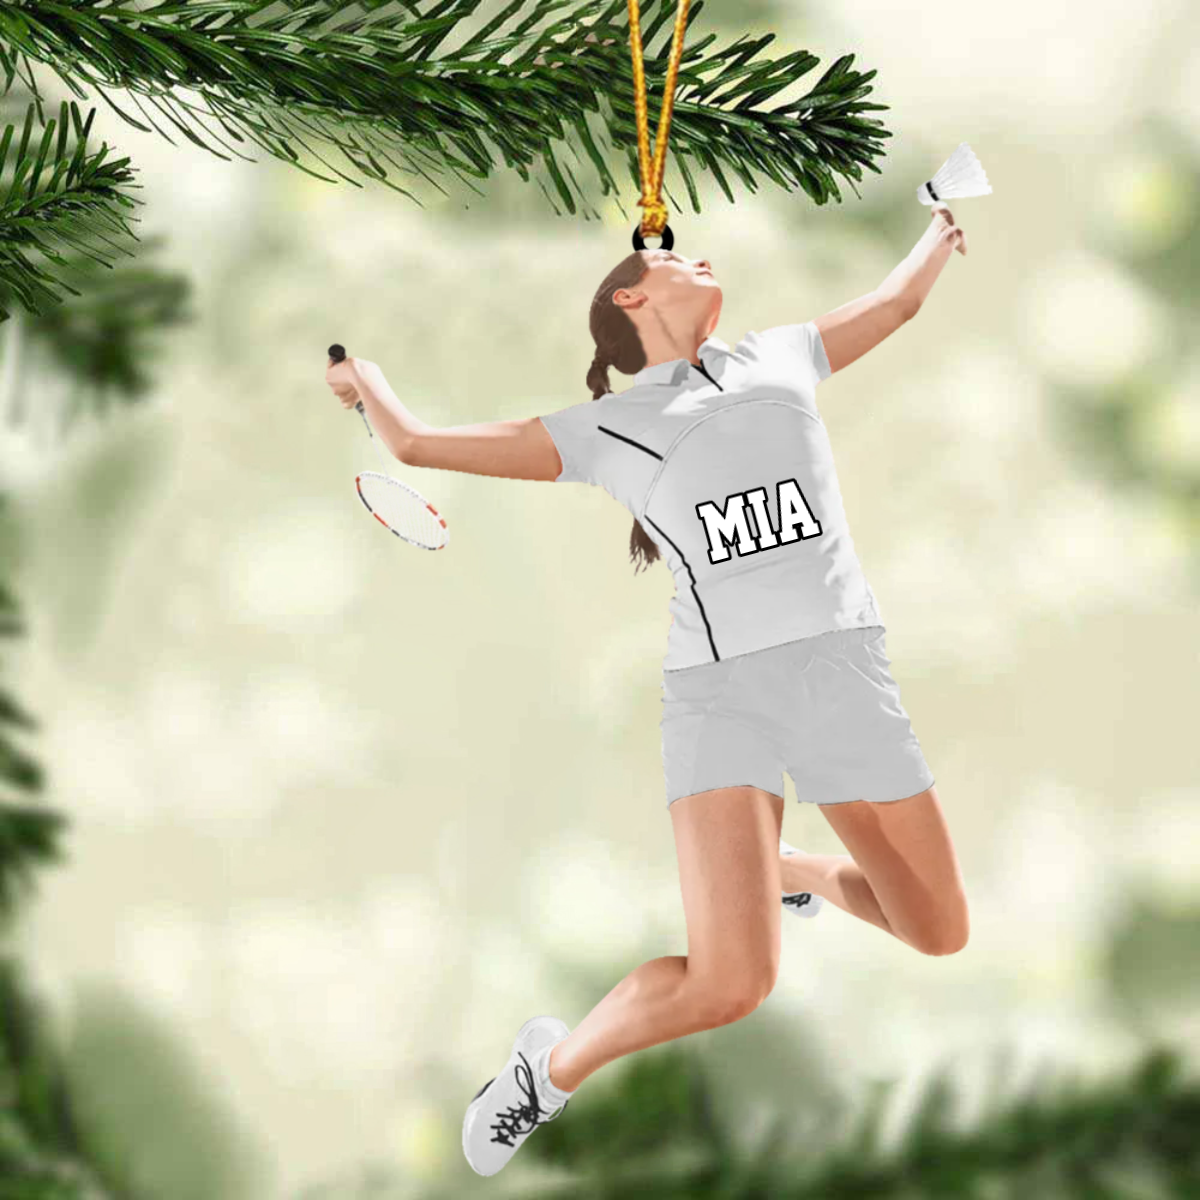 Custom Personalized Badminton Lovers Christmas Ornament/ Gift For Badminton Player